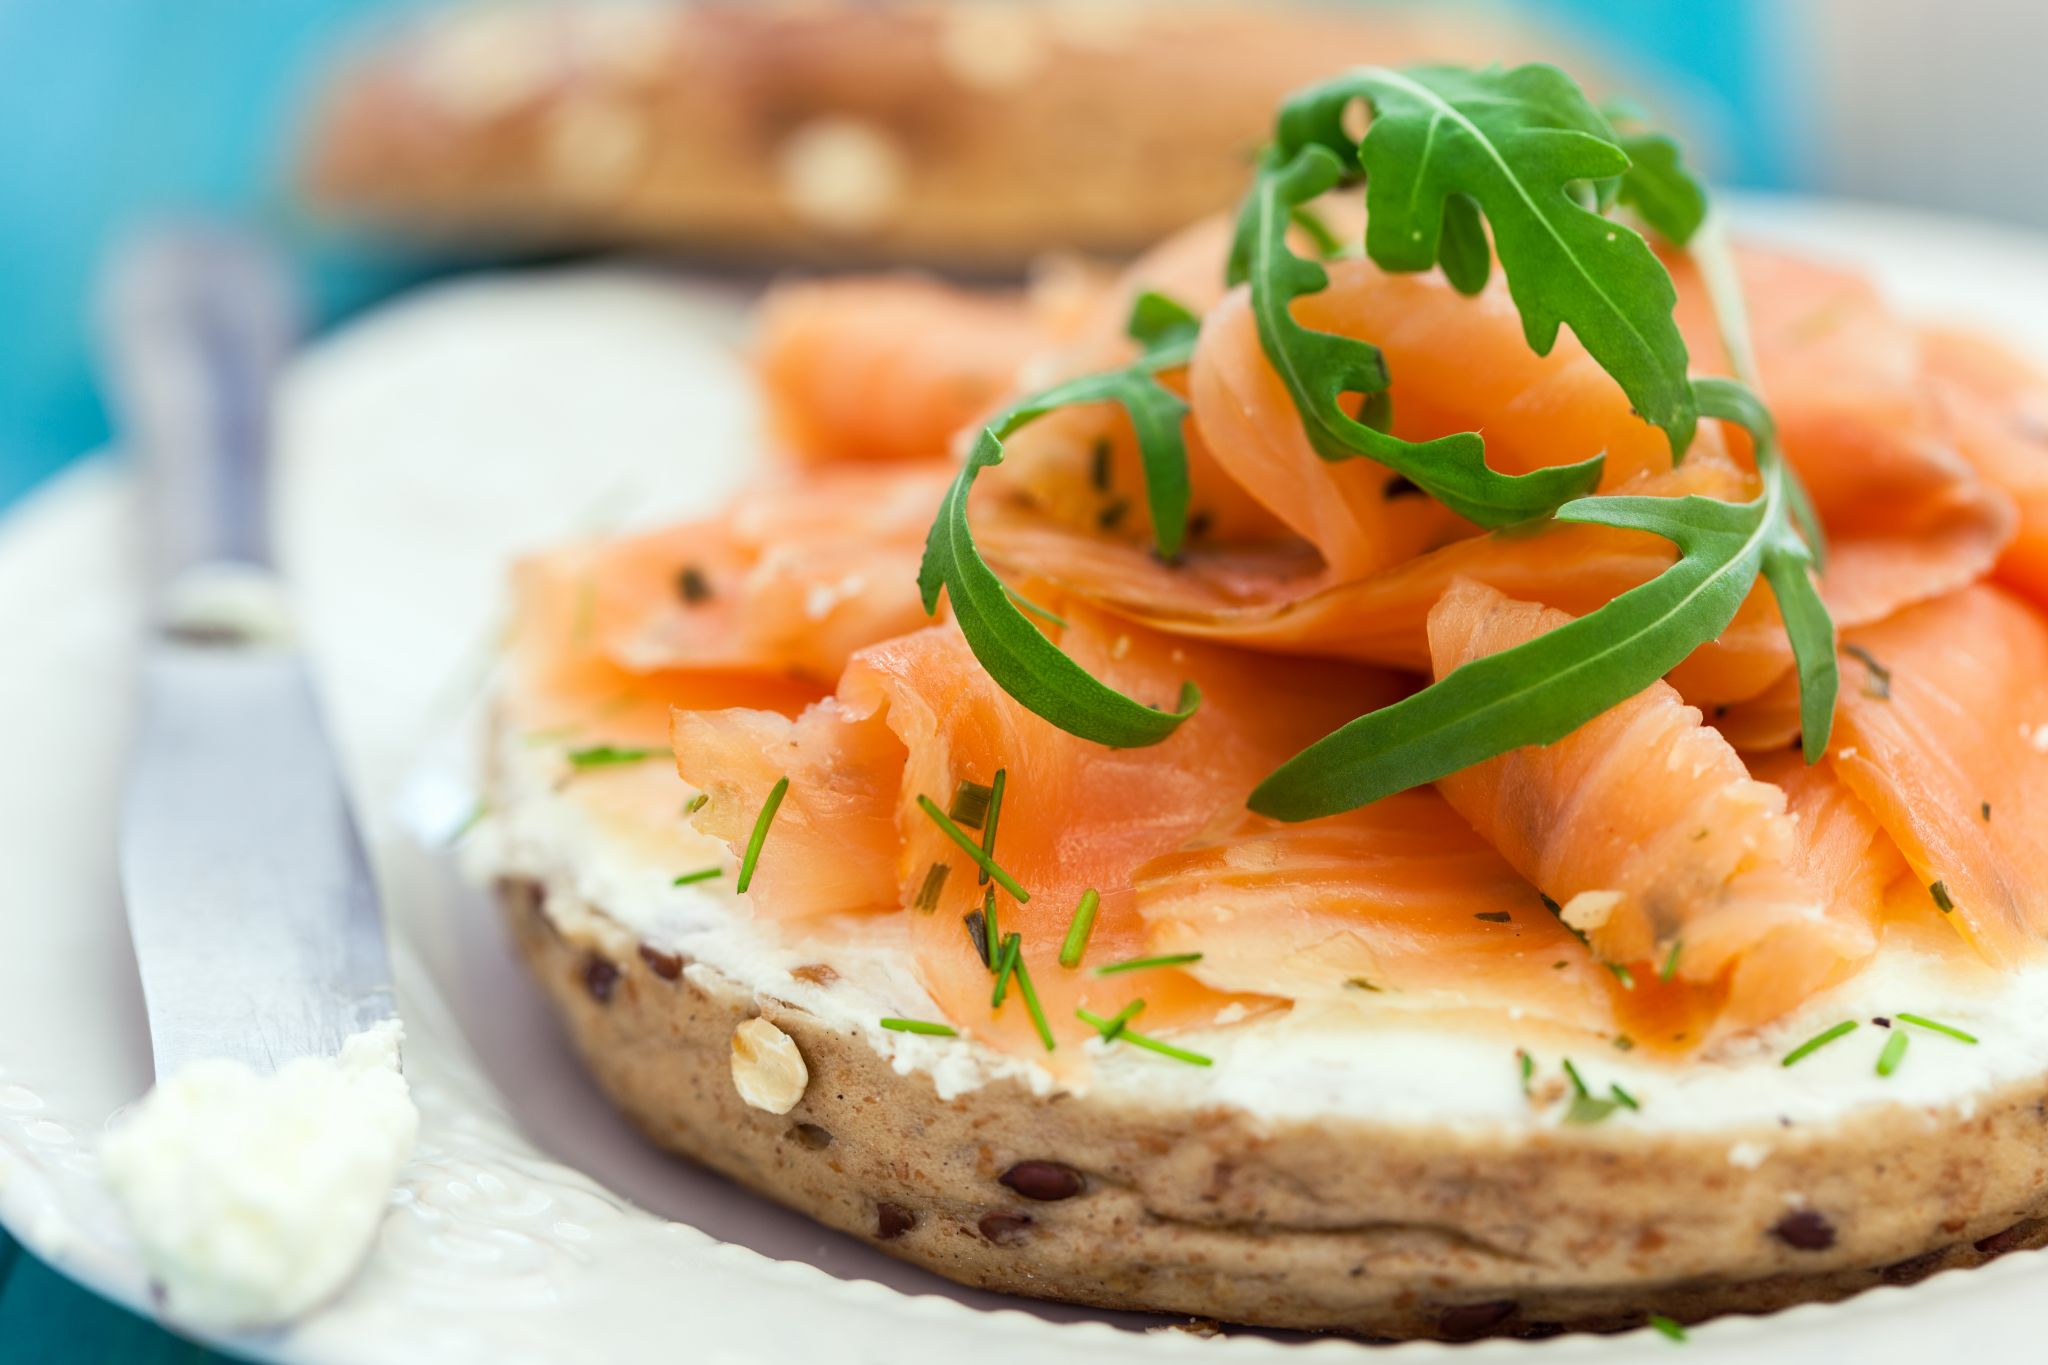 Tomorrow is National Bagels and Lox Day Here's where to get your fix